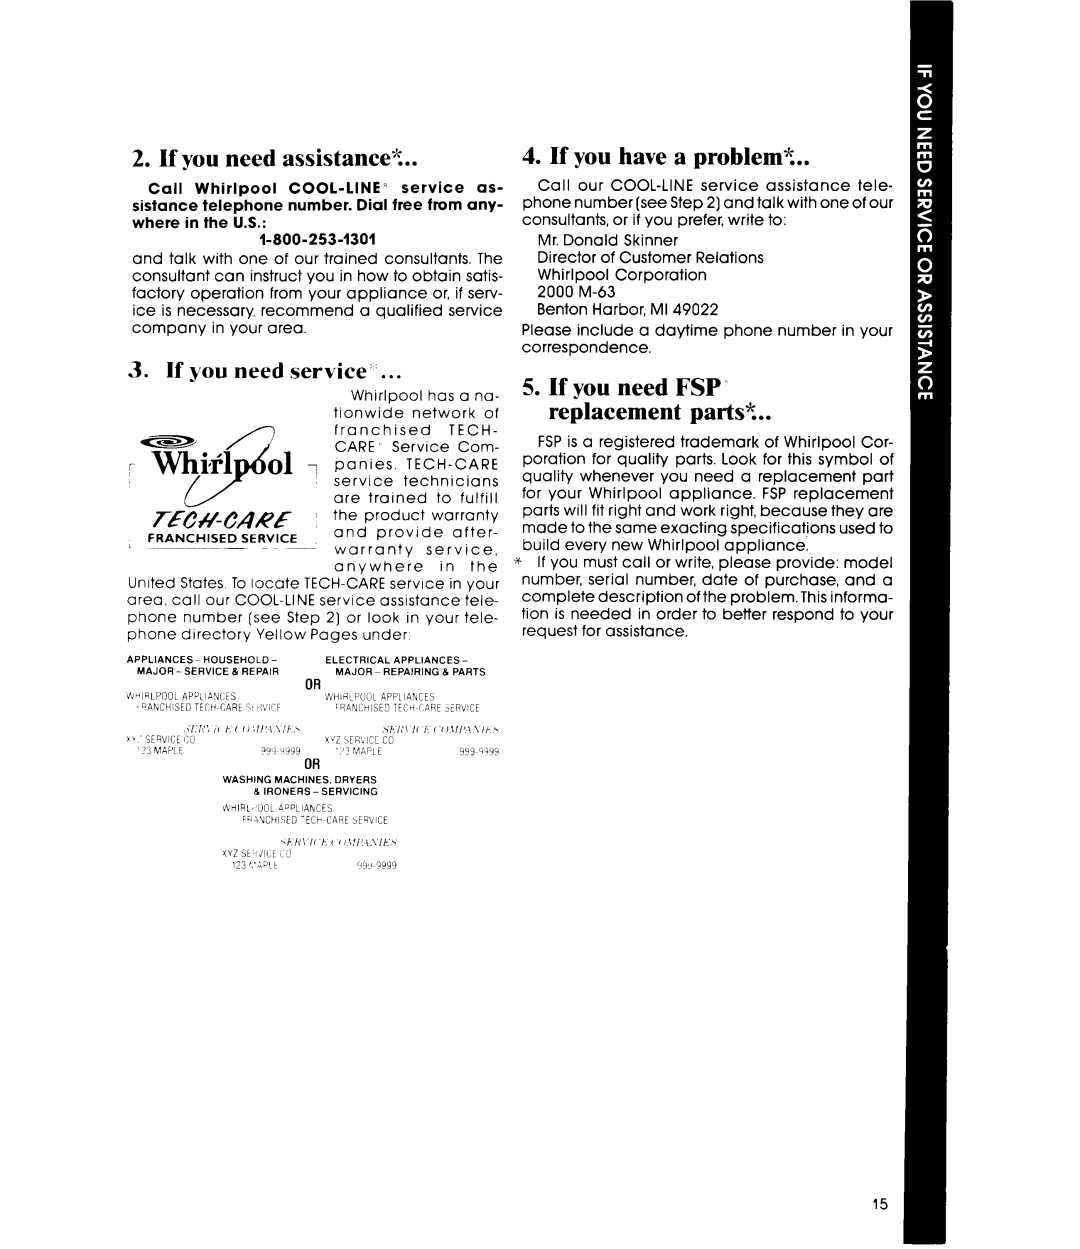 Whirlpool DU1800XT manual If you need assistance%, If you need service”, n&4wARE, If you have a problem? 